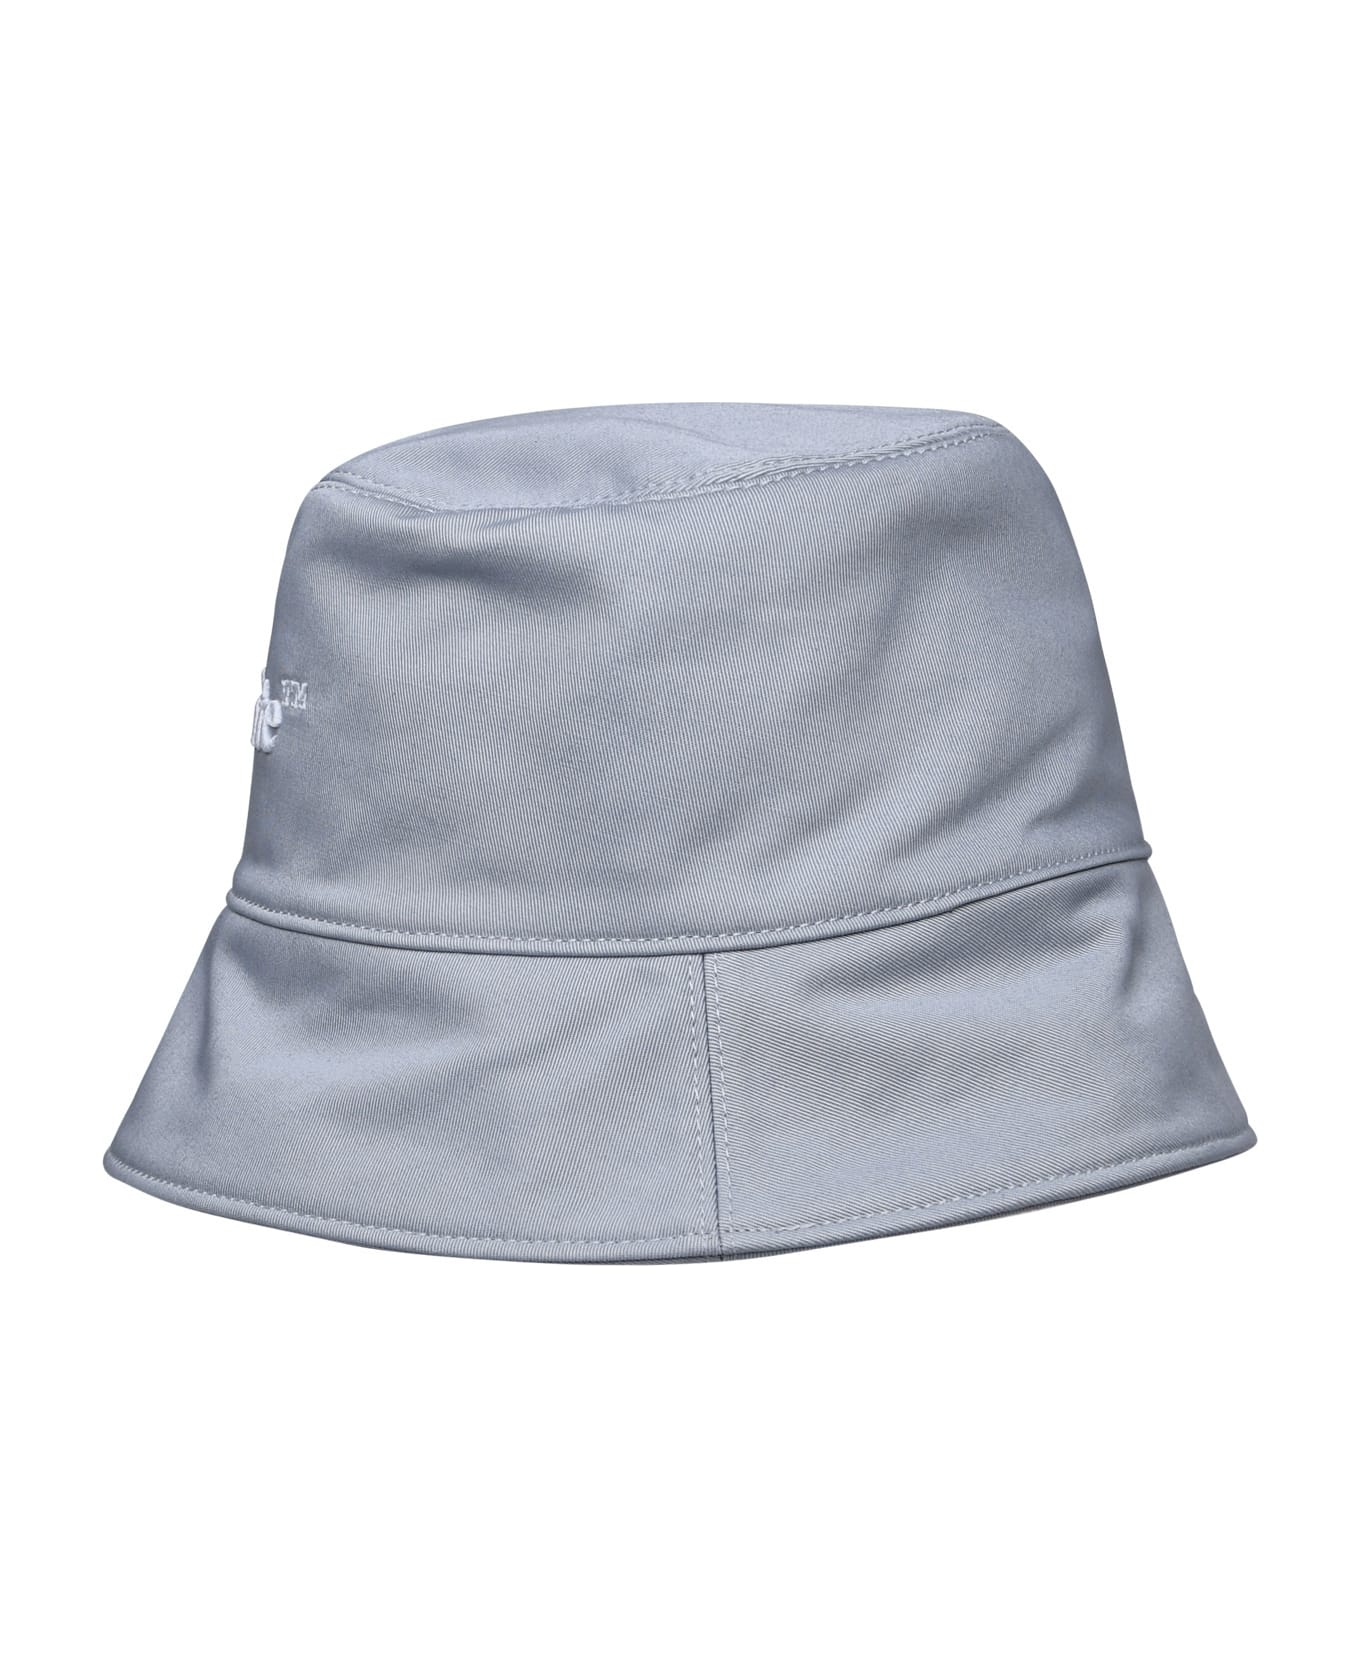 Off-White Logo Embroidered Bucket Hat - Light Blue 帽子